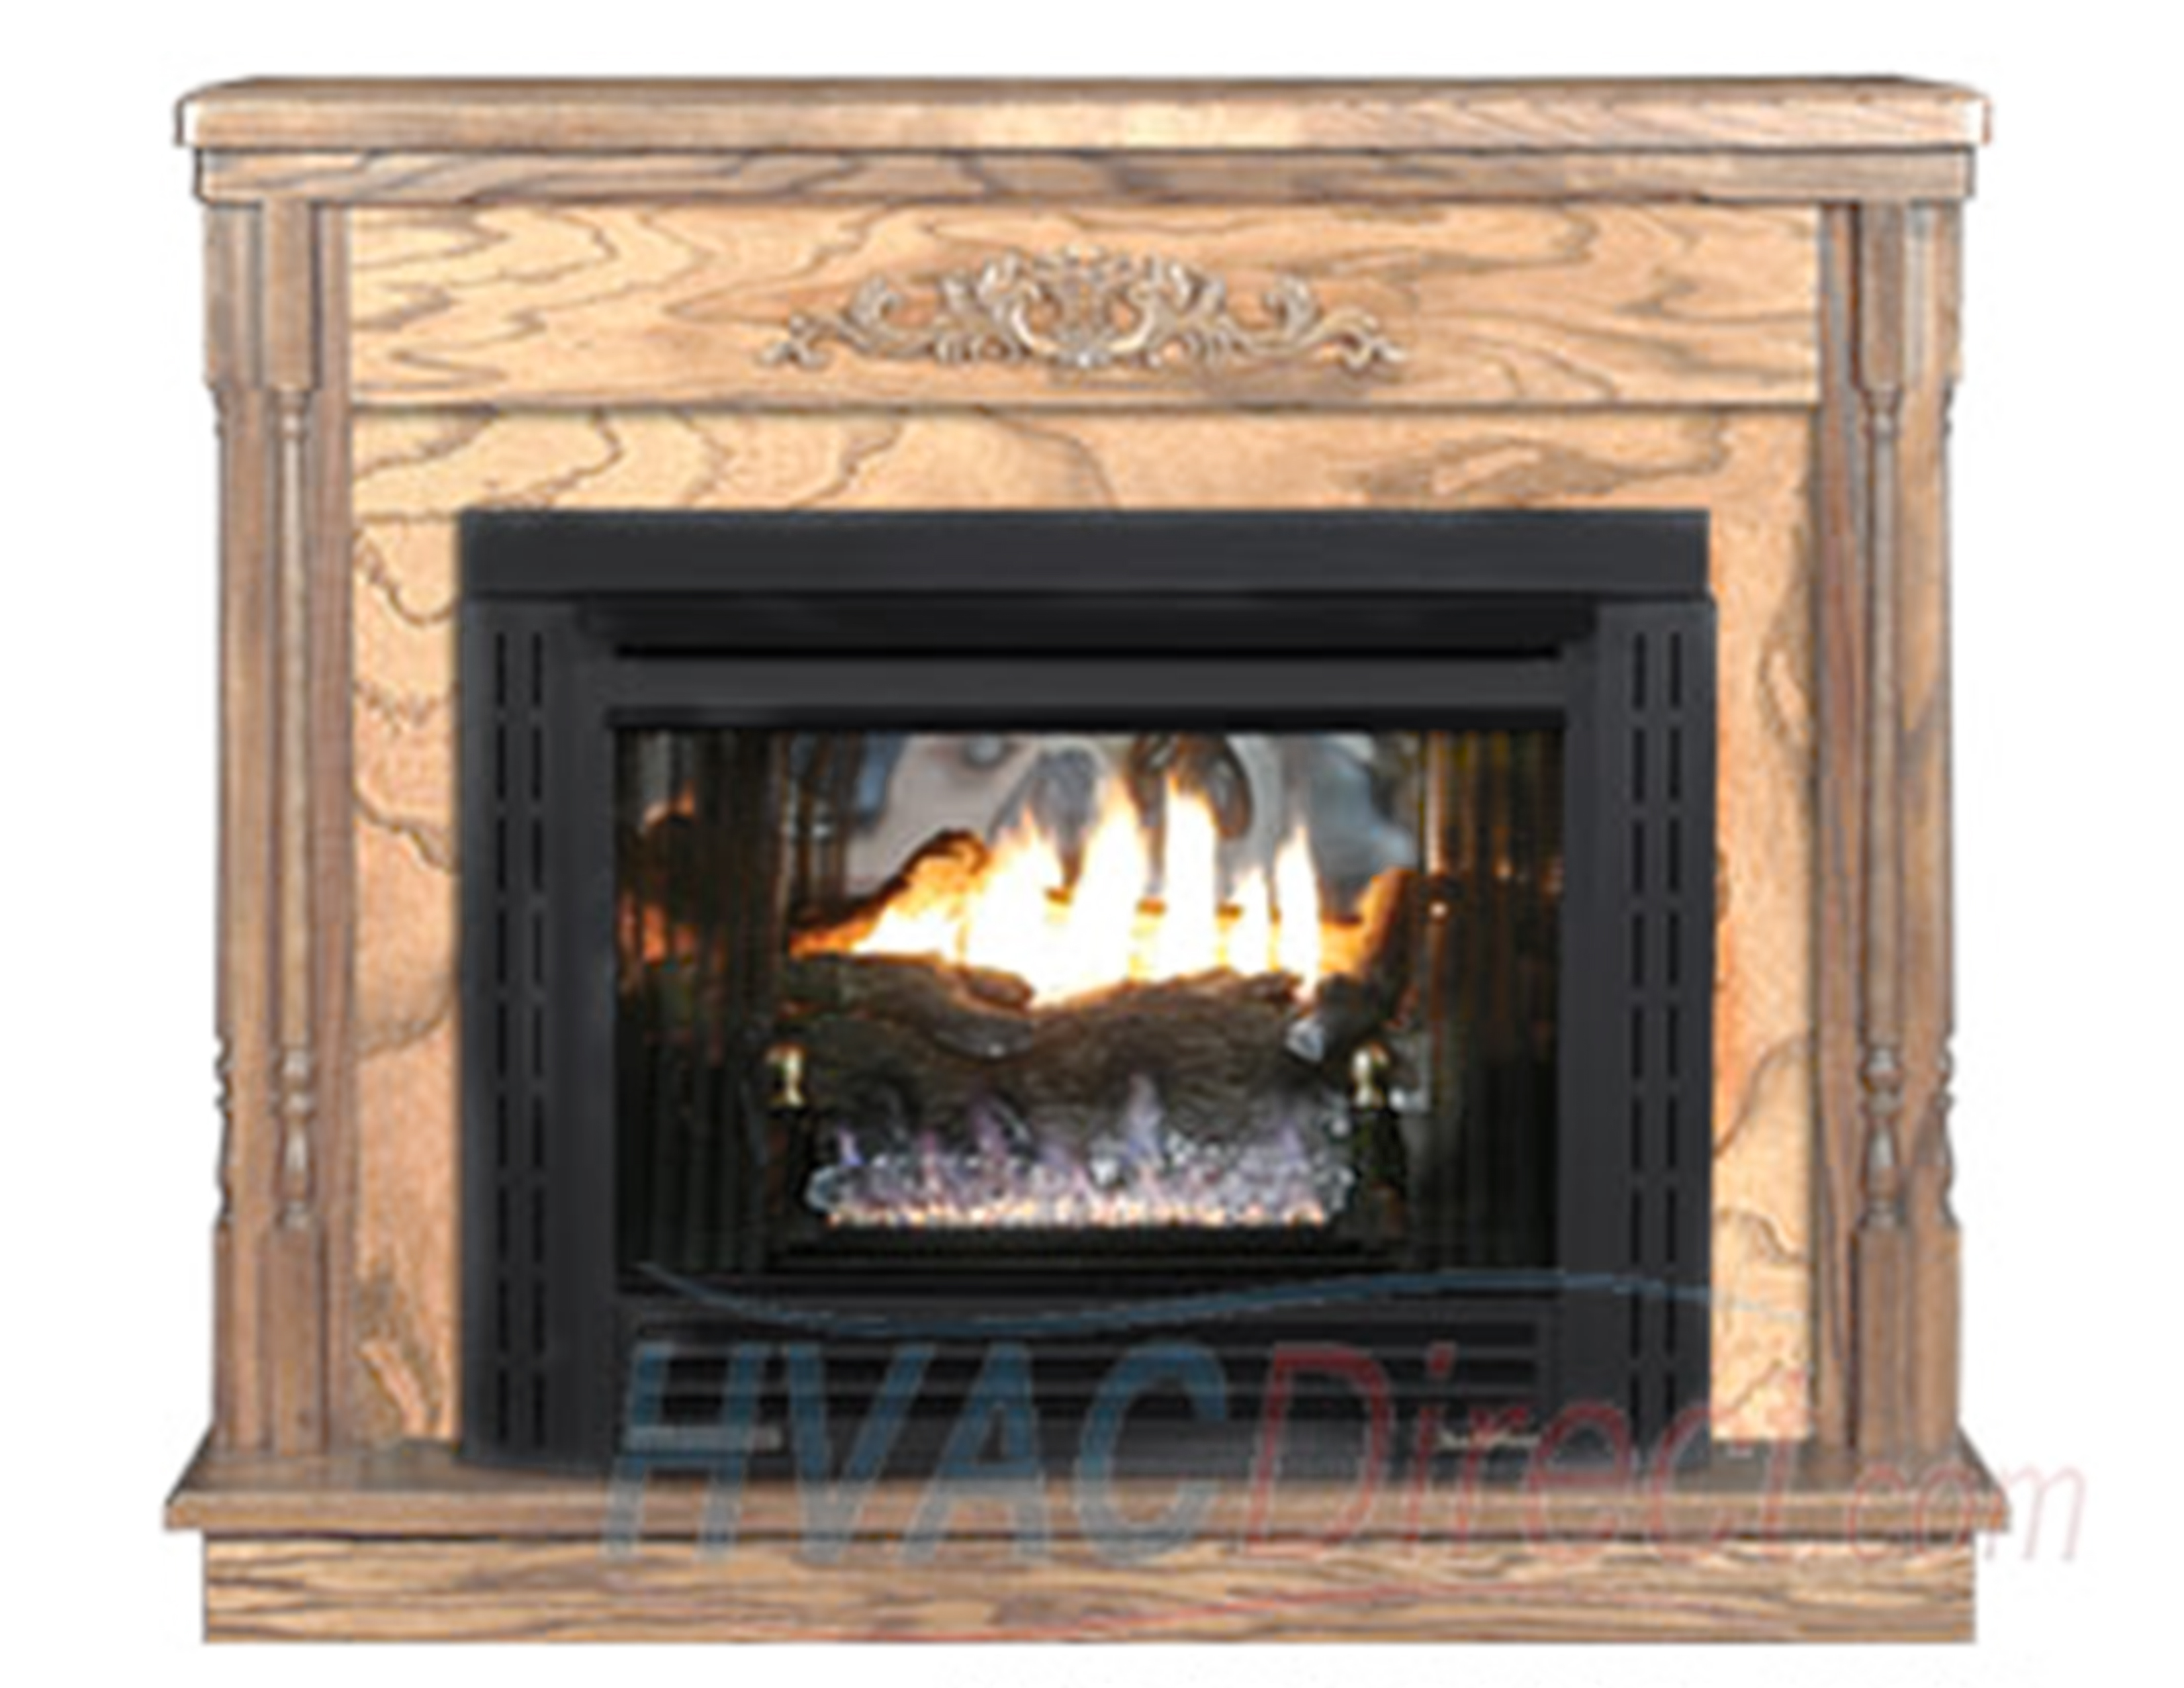 Fireplace Fresh Air Intake Vent Inspirational Buck Stove Model 34zc Zero Clearance Vent Free Gas Fireplace